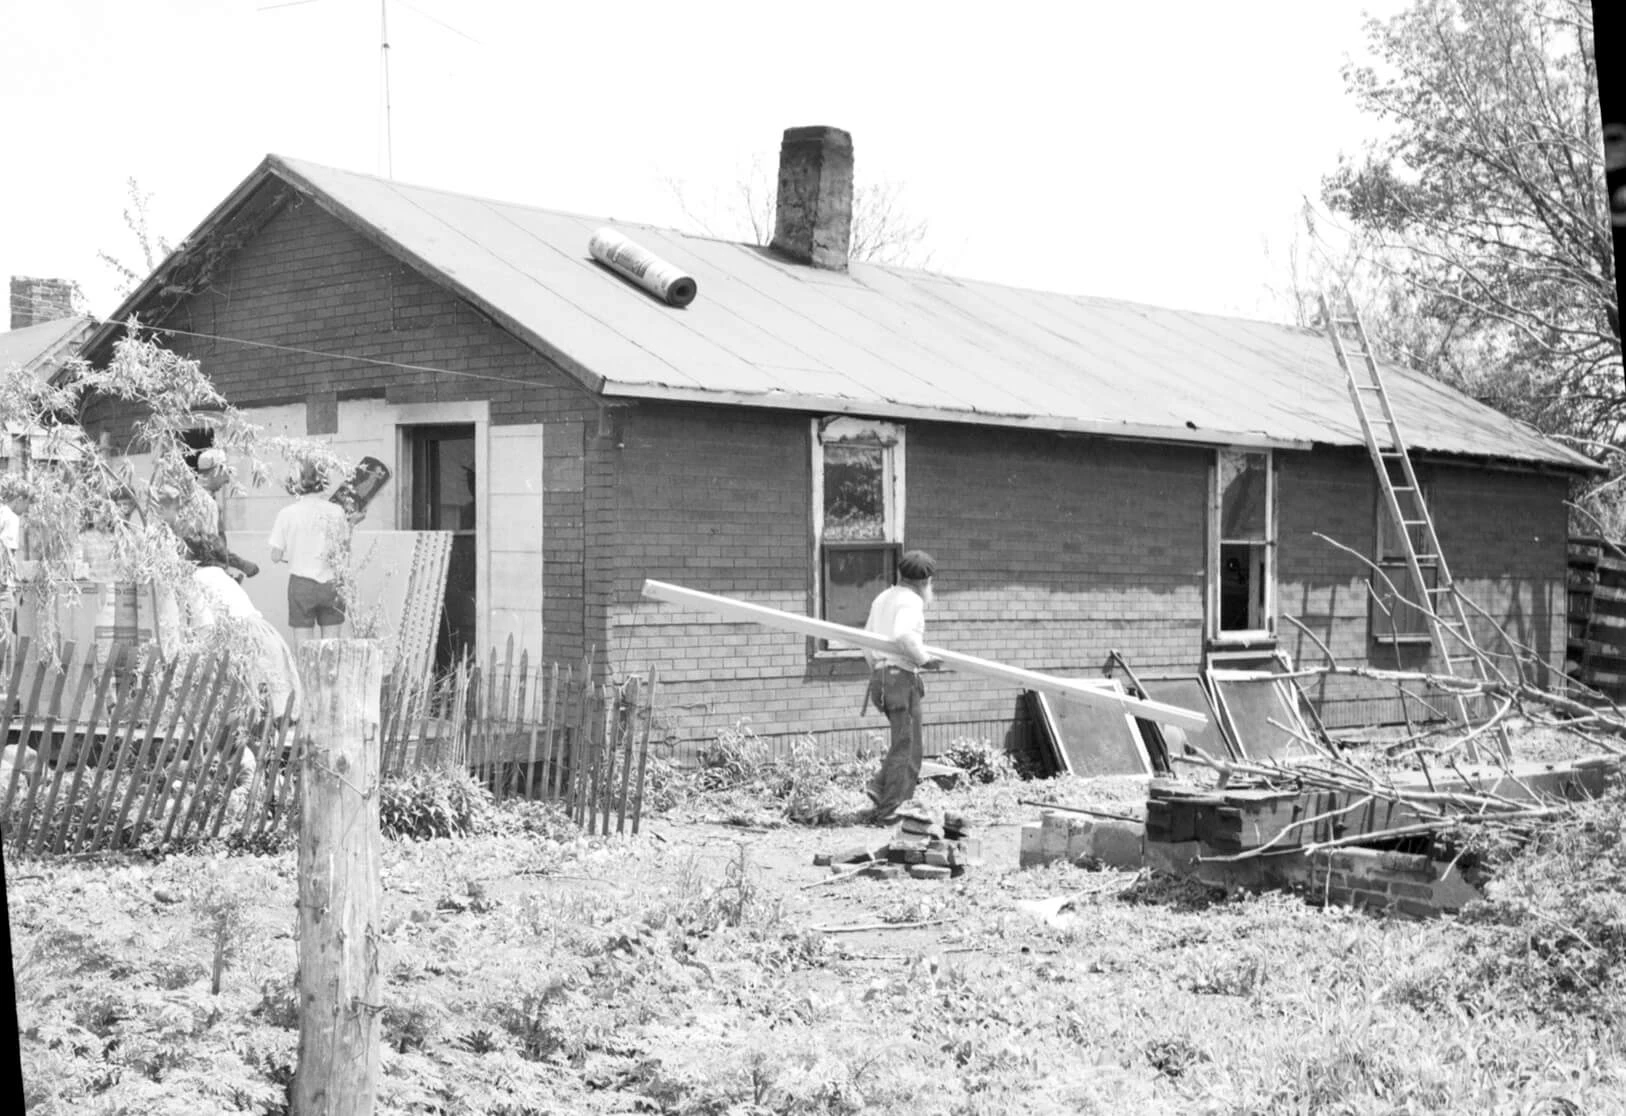 There is a small one-story home.  A man is carrying a board toward a ladder which is leaning on the roof.  A roll of roofing is on the shingle-less roof.